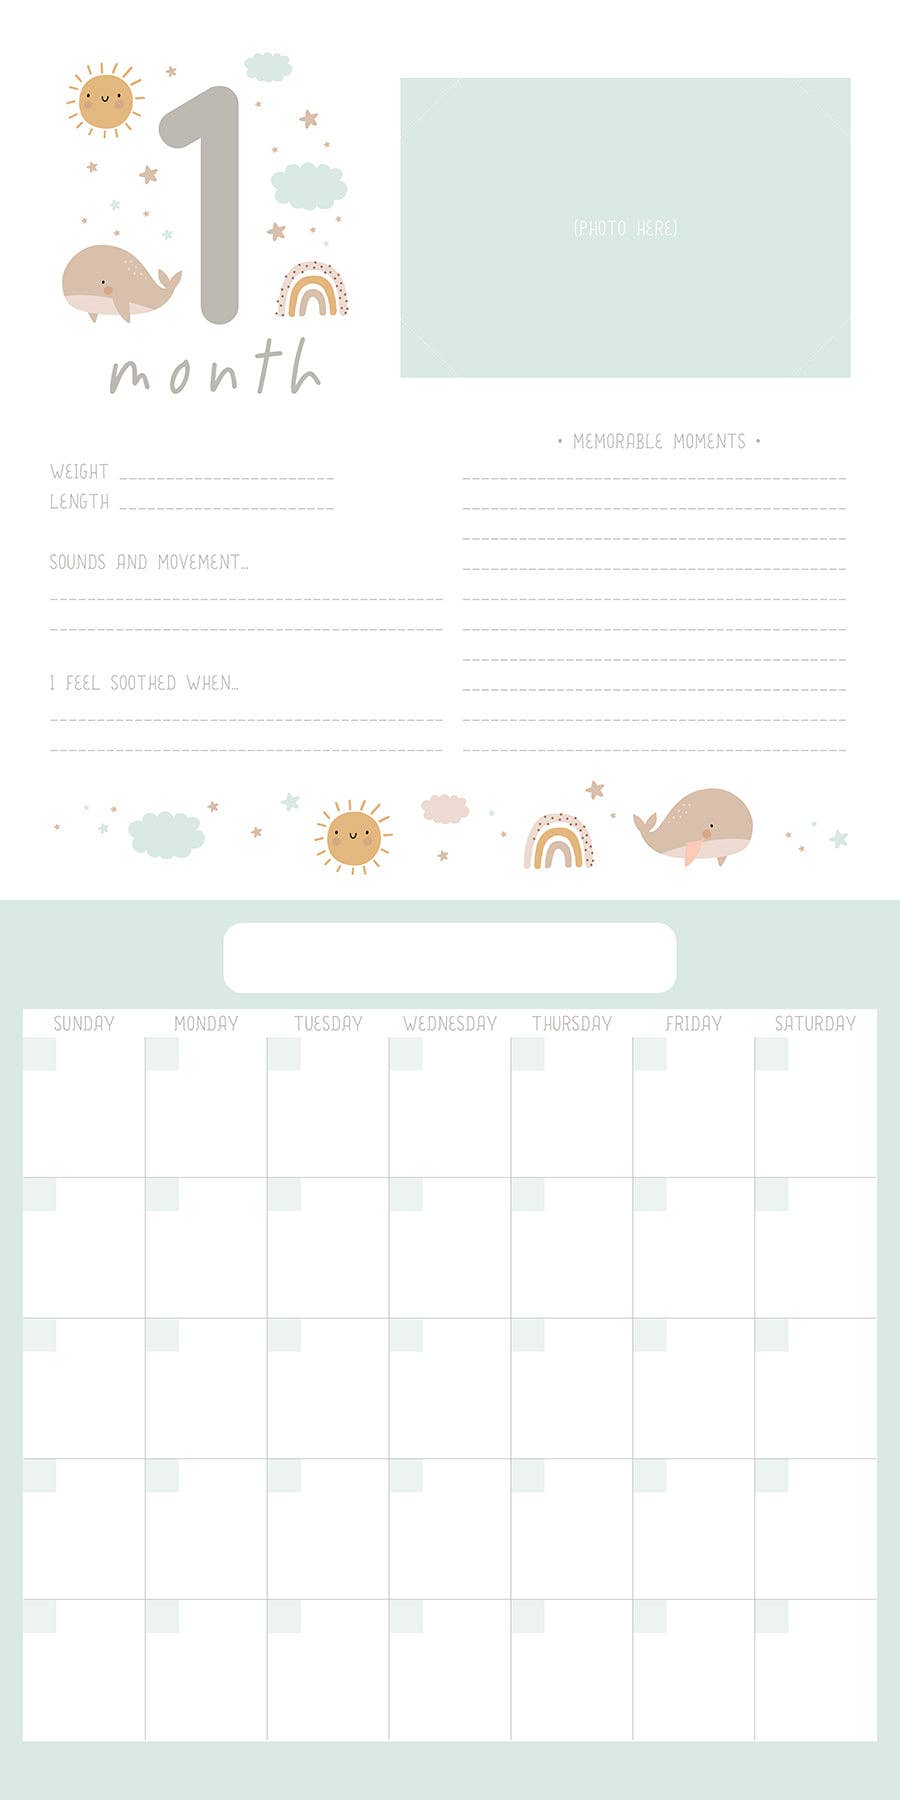 Baby's First Year Undated Wall Calendar